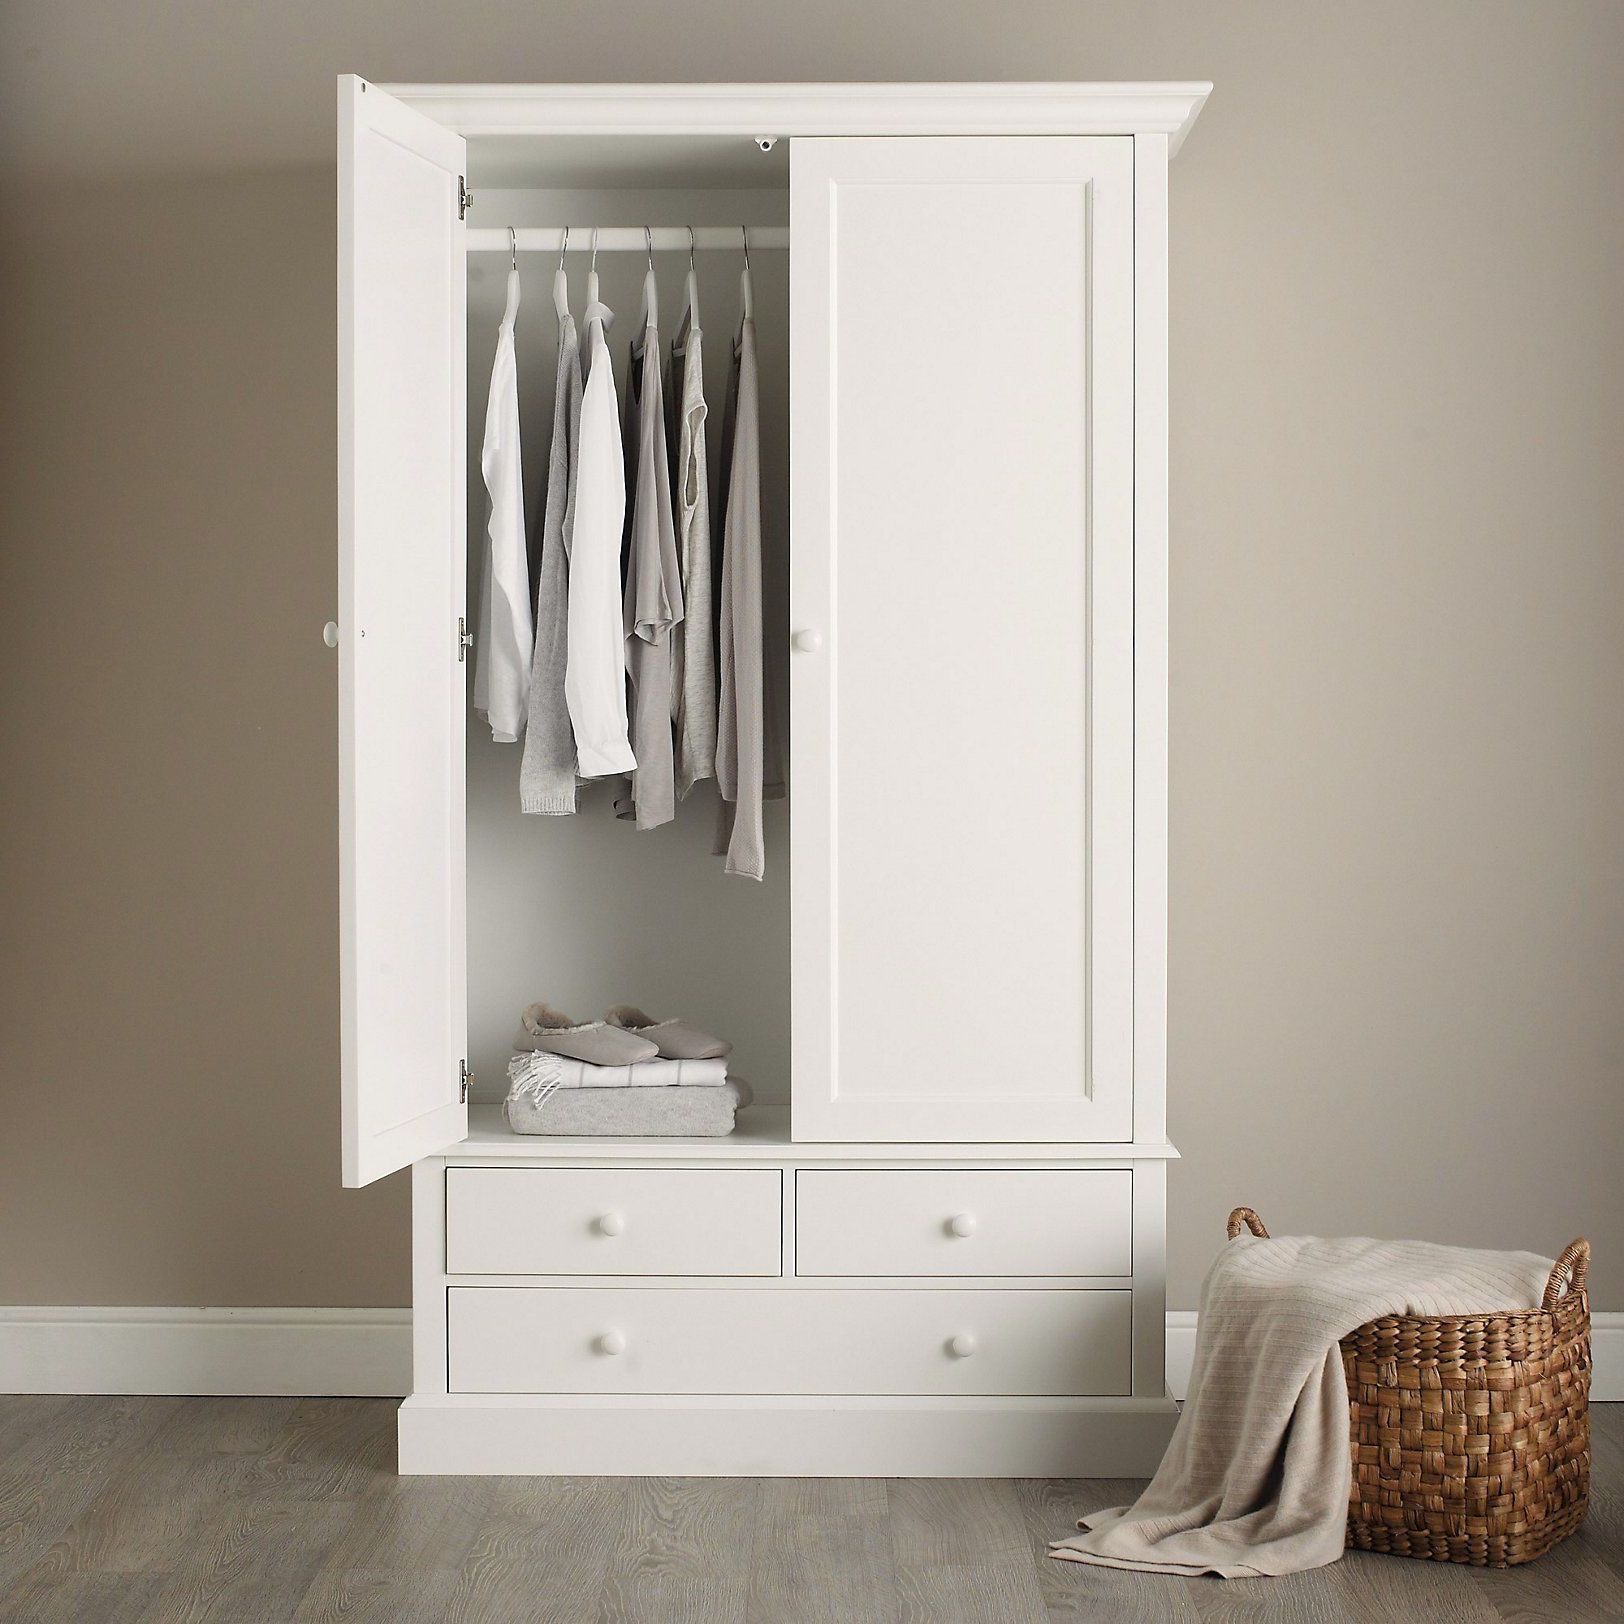 Classic Large Wardrobe | Bedroom Furniture | The White Company | Classic  Bedroom Furniture, White Wooden Wardrobe, Large Wardrobes Throughout White Wooden Wardrobes (View 11 of 20)